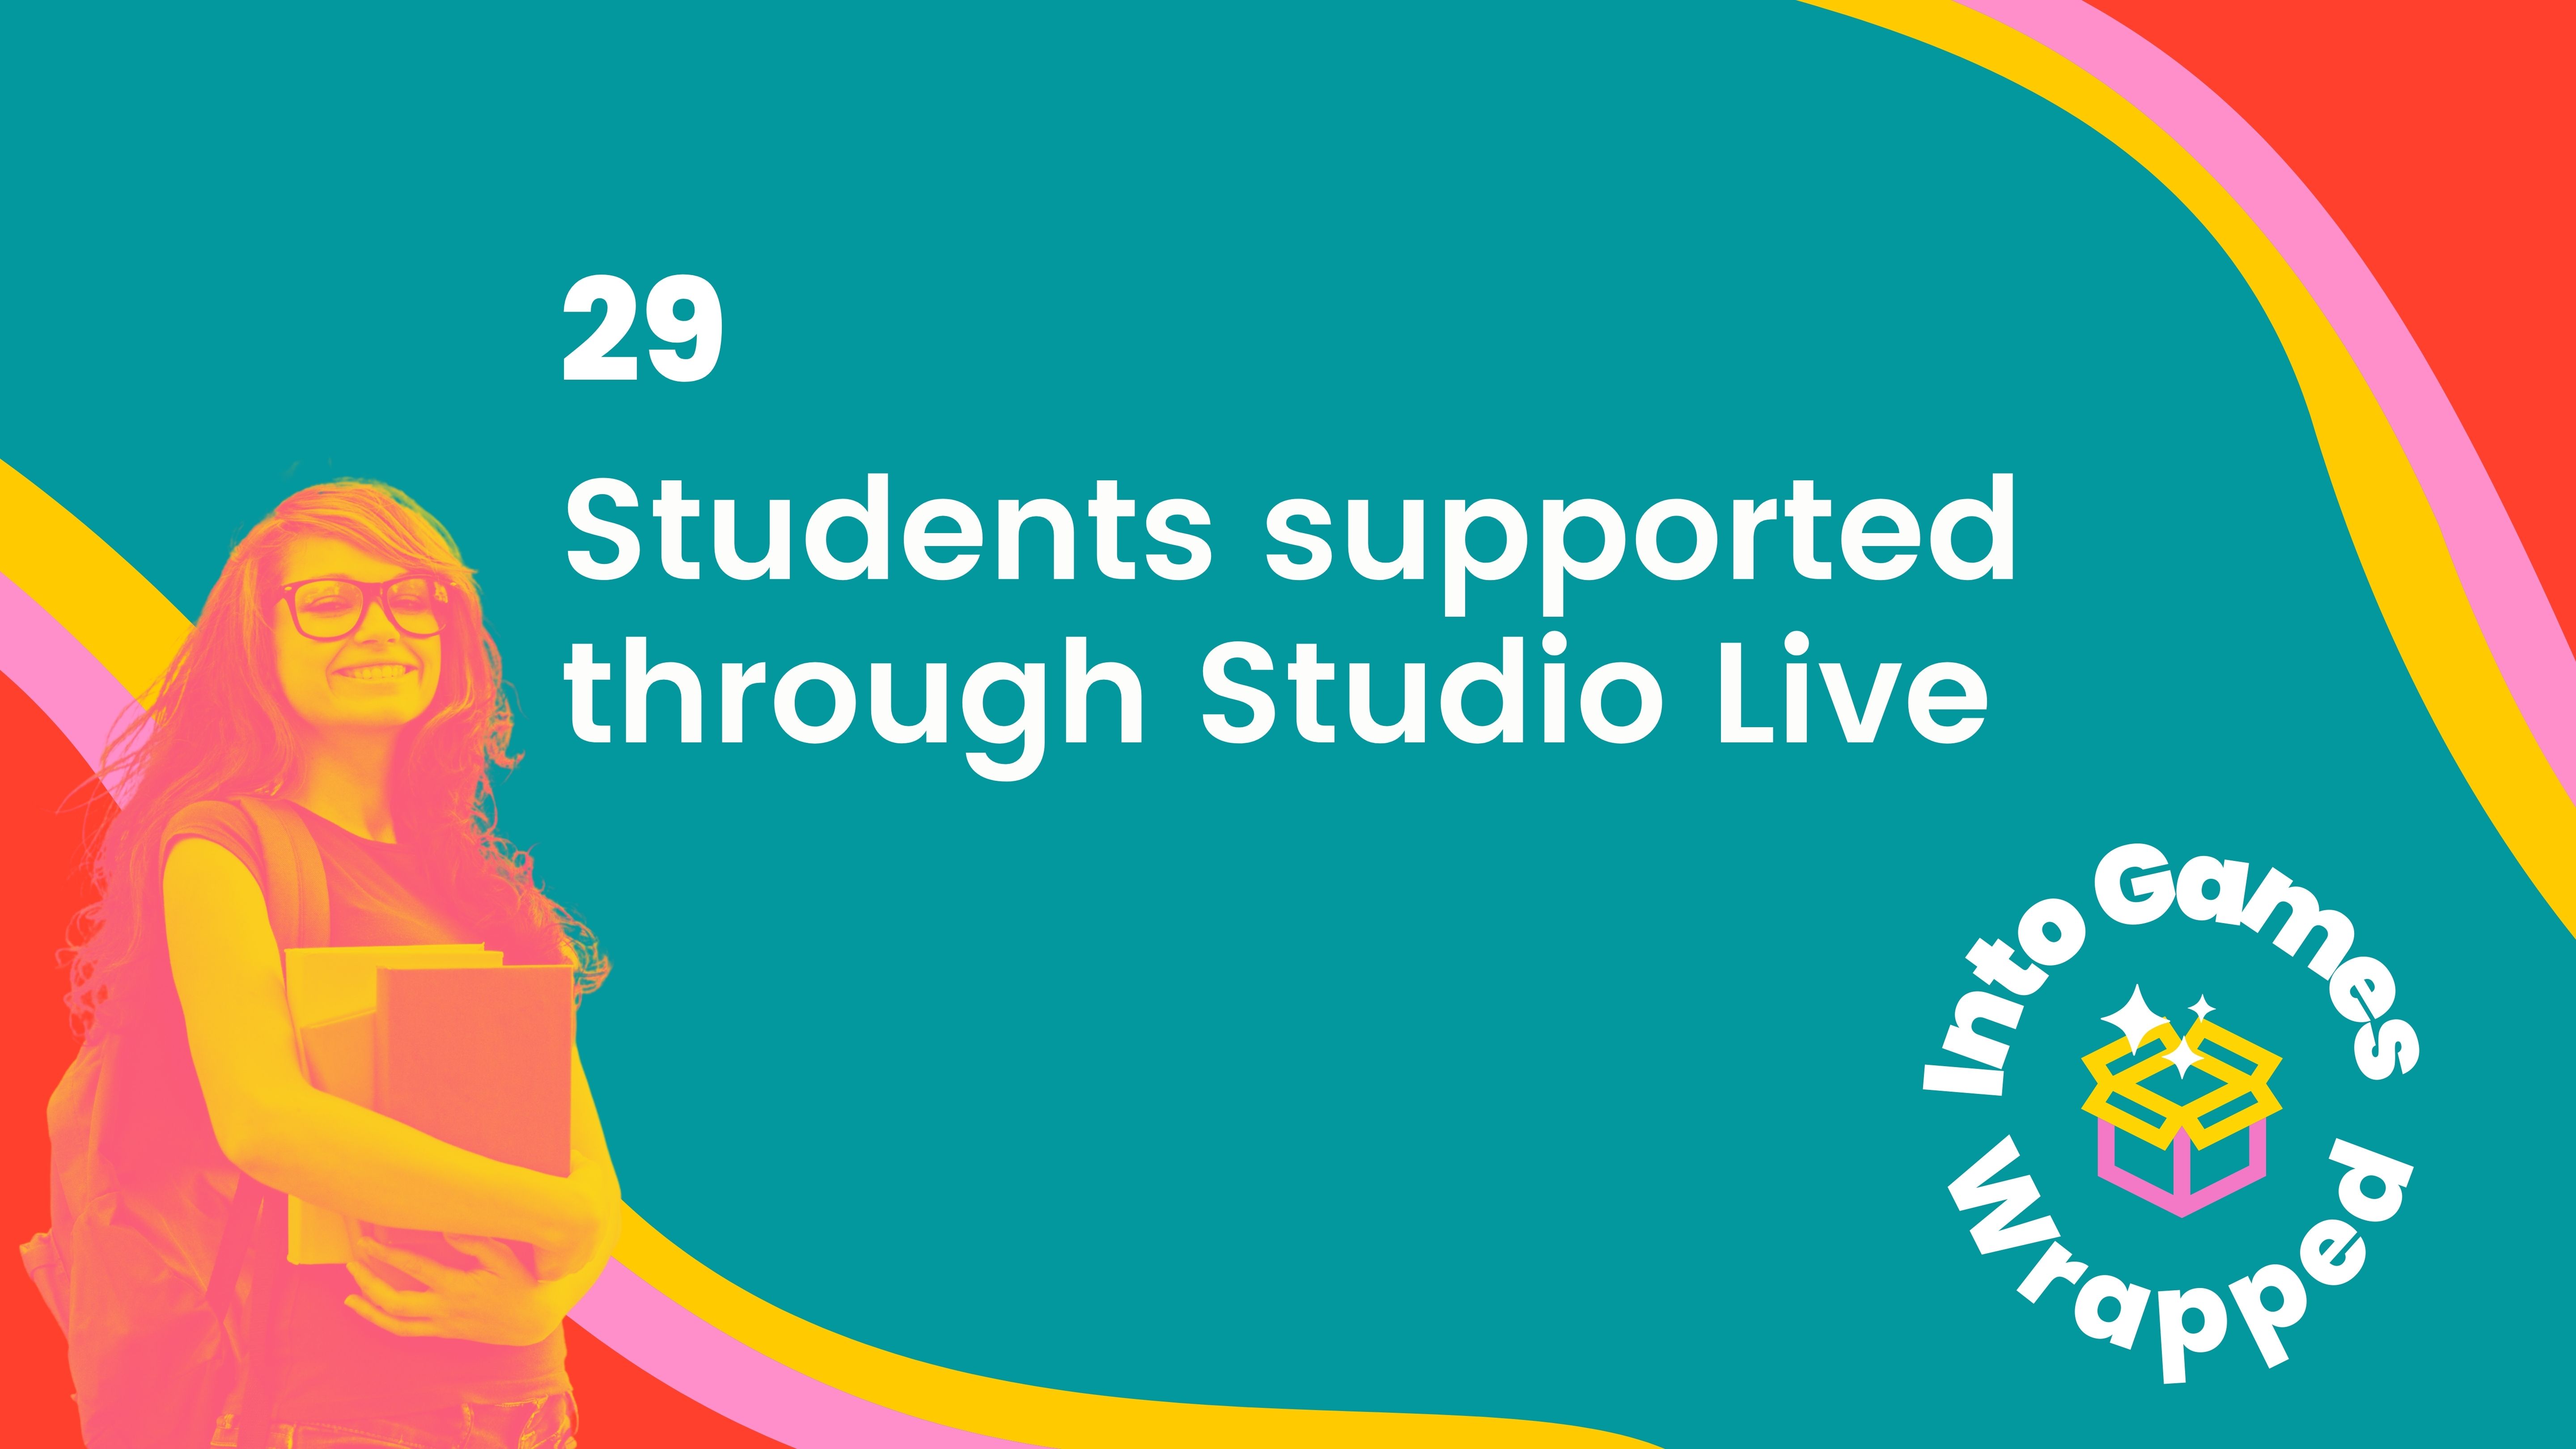 29 Students supported through Studio Live